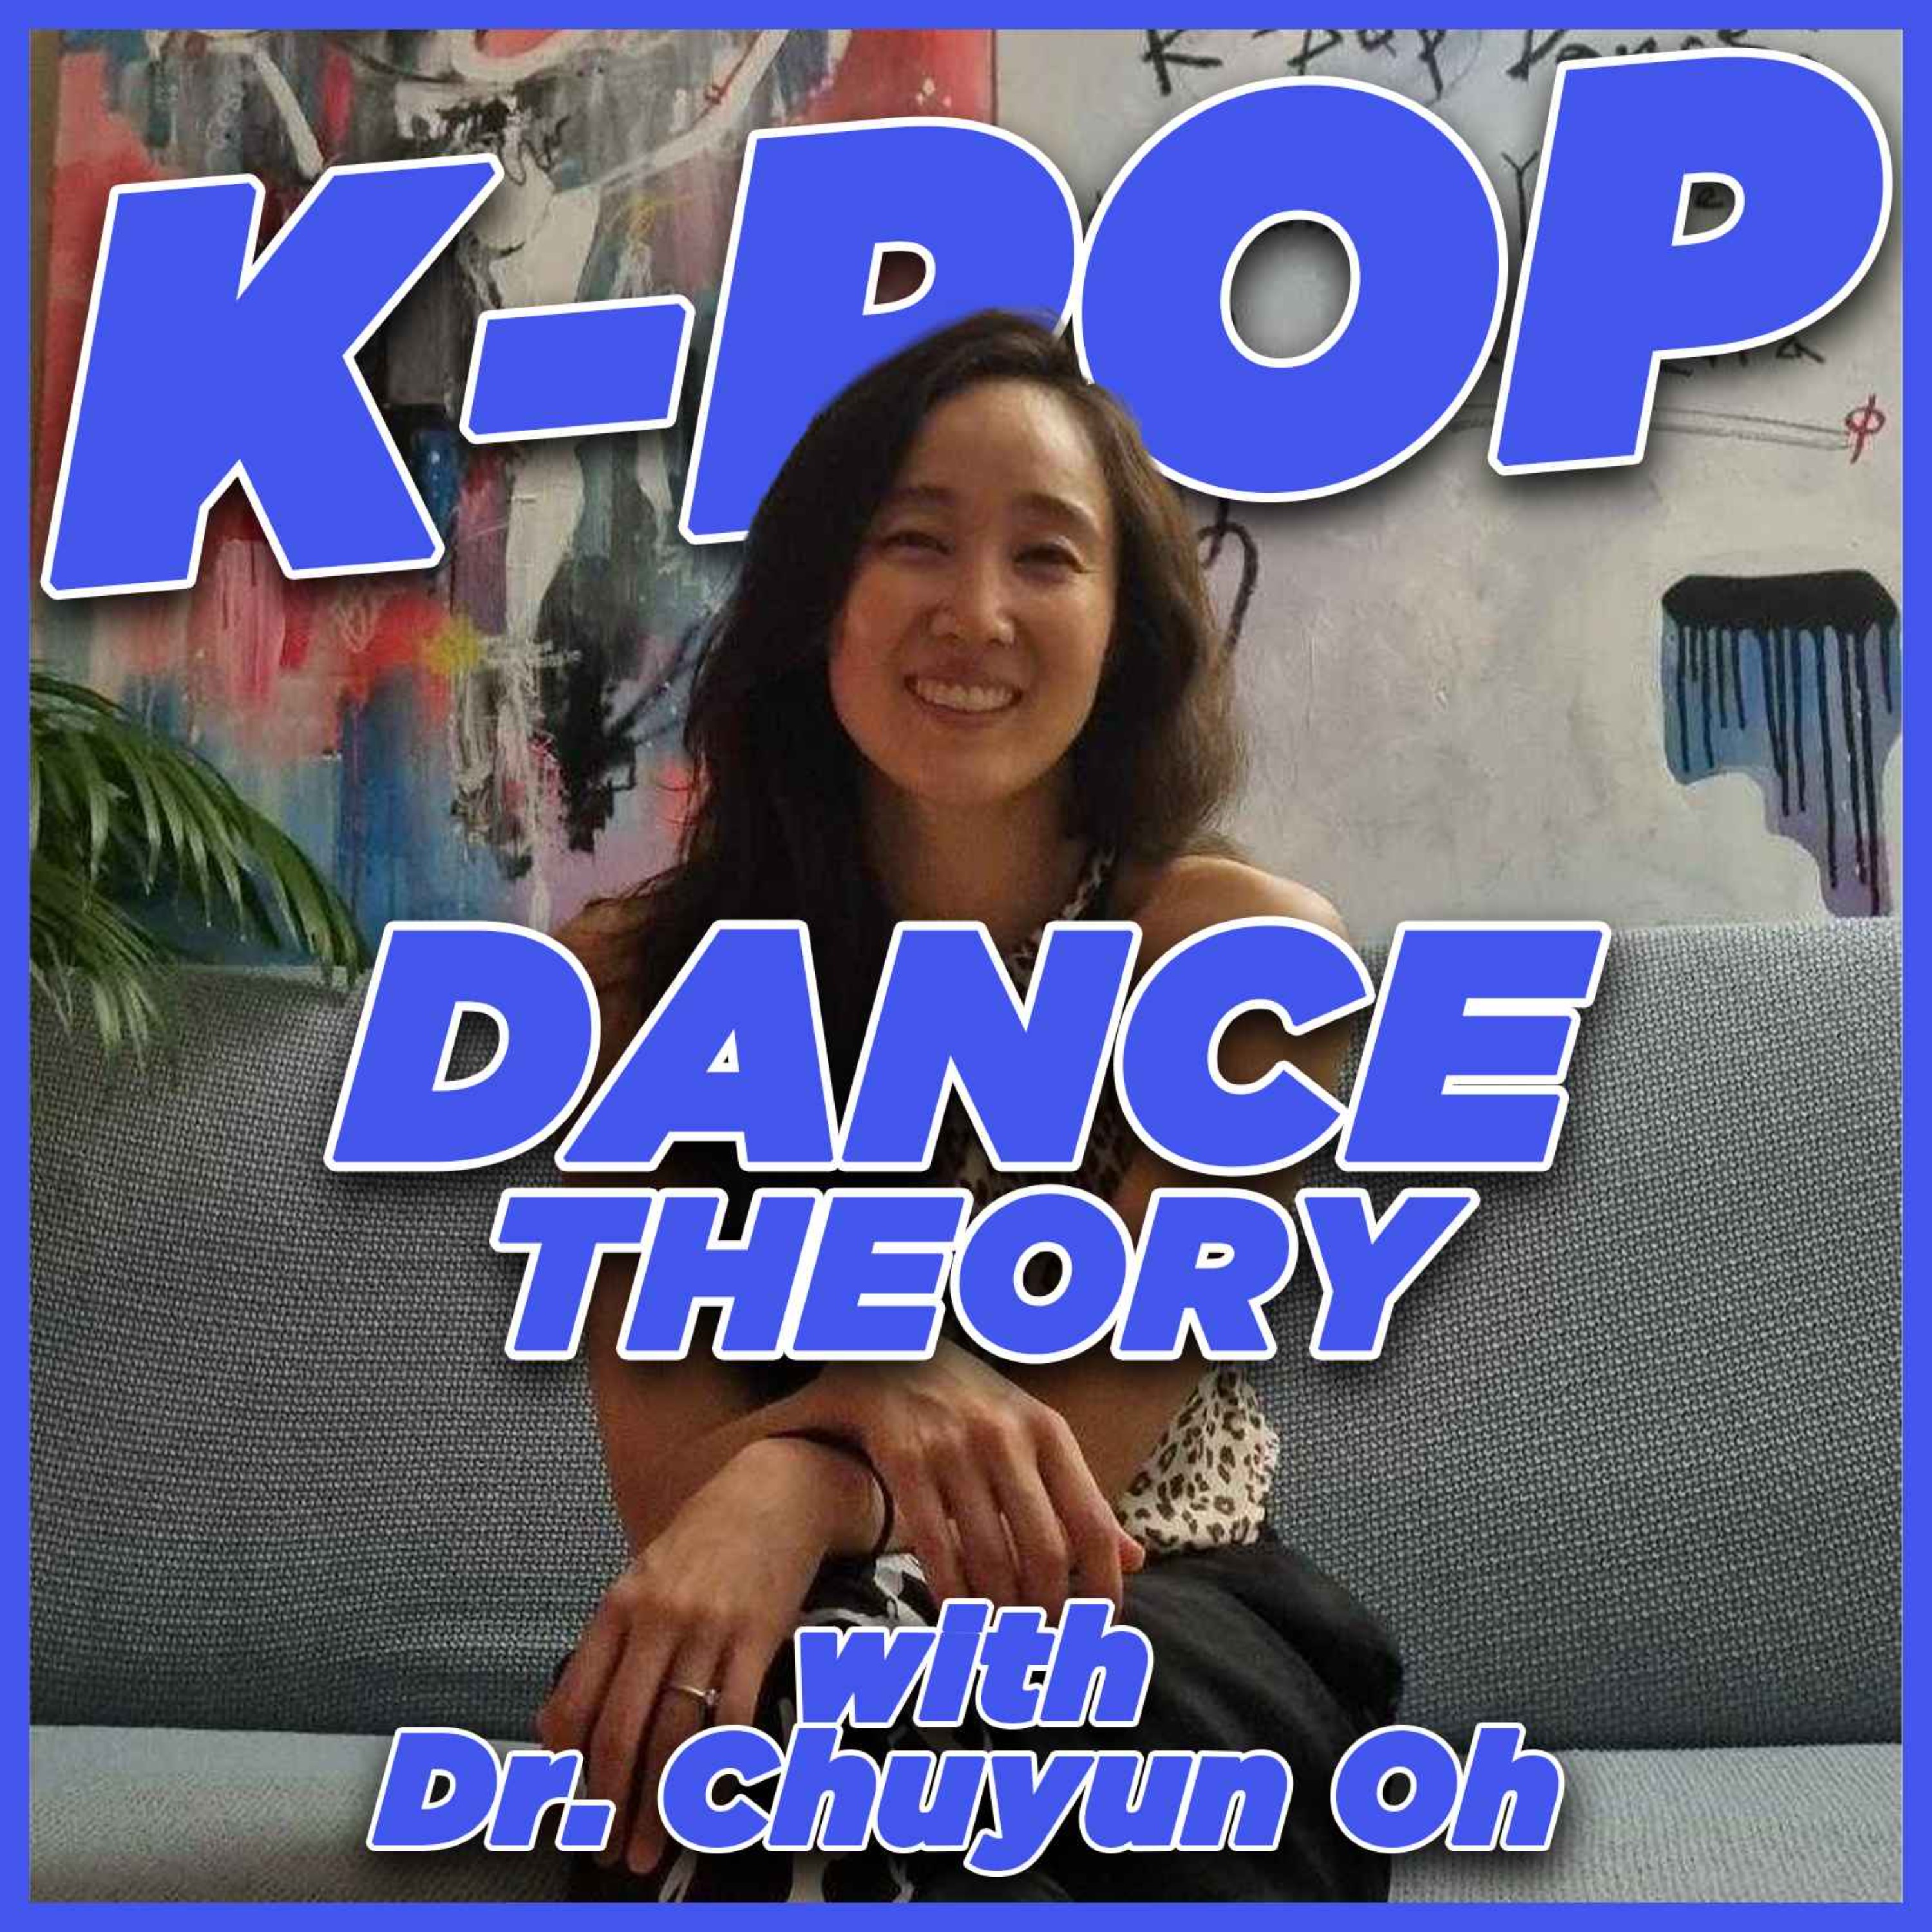 Kpop Dance Theory with Dr. Chuyun Oh